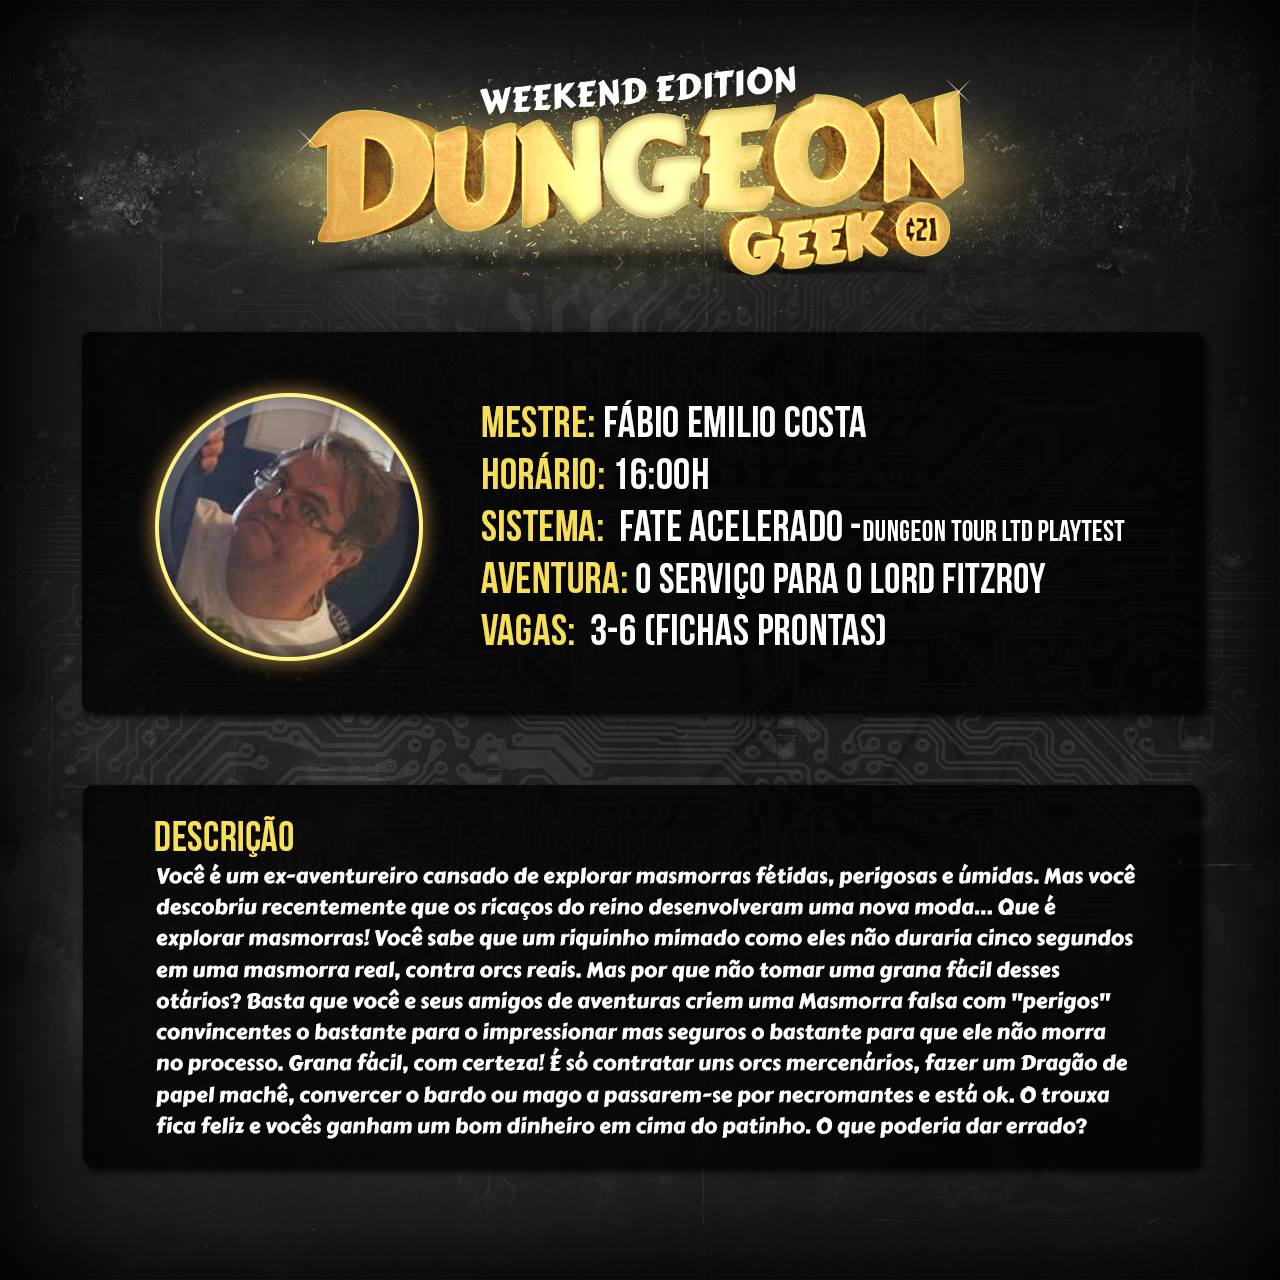 The Image Divulgation for _Dungeon Geek Weekend_ (in Portuguese)